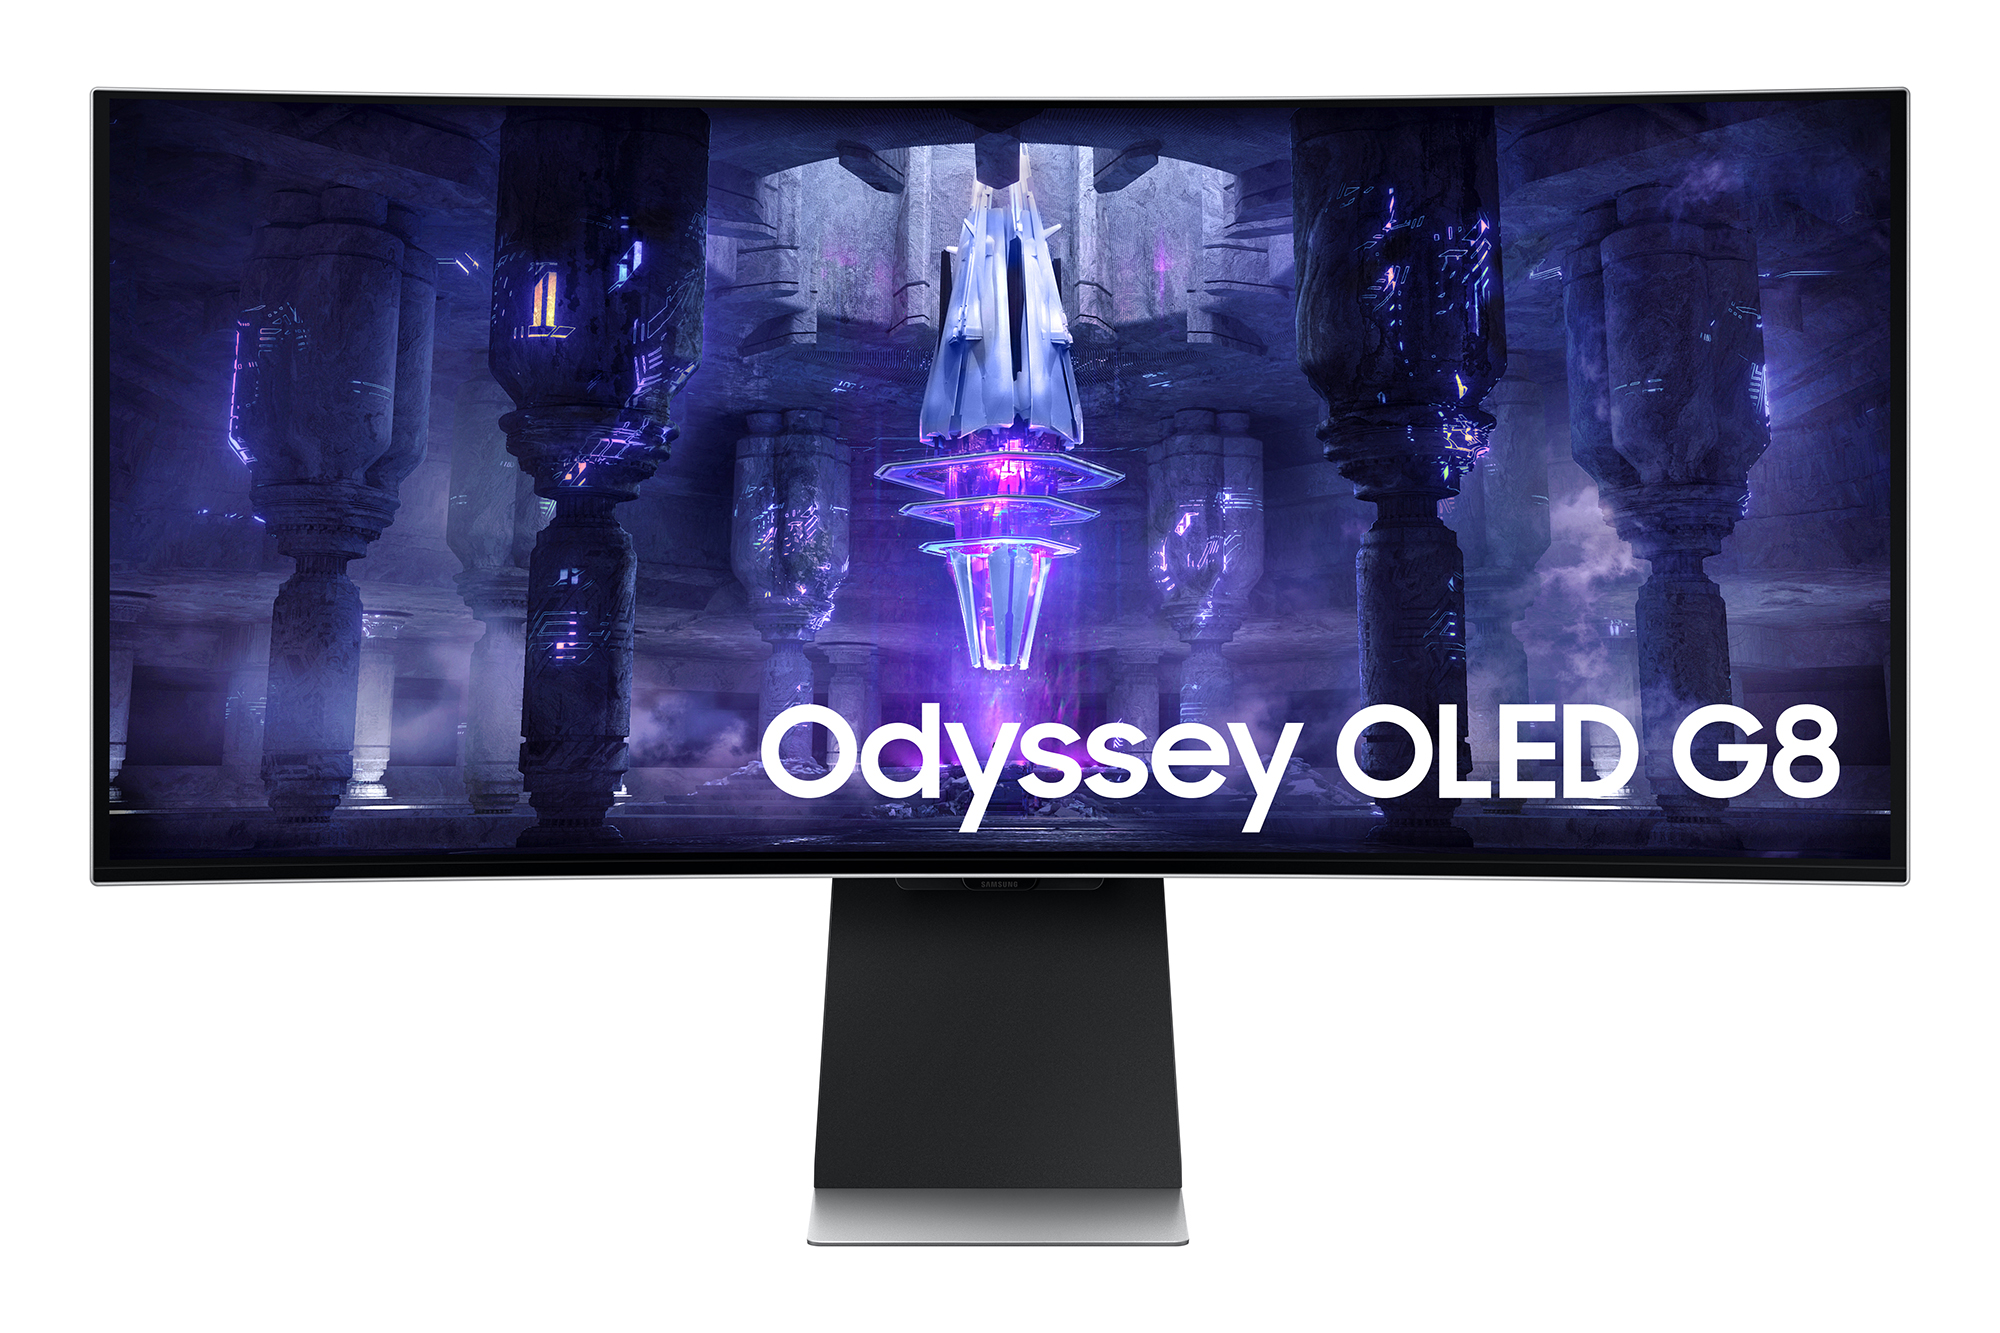 Equipped with a 34-inch OLED panel, the Odyssey OLED G8 has a QHD resolutio...